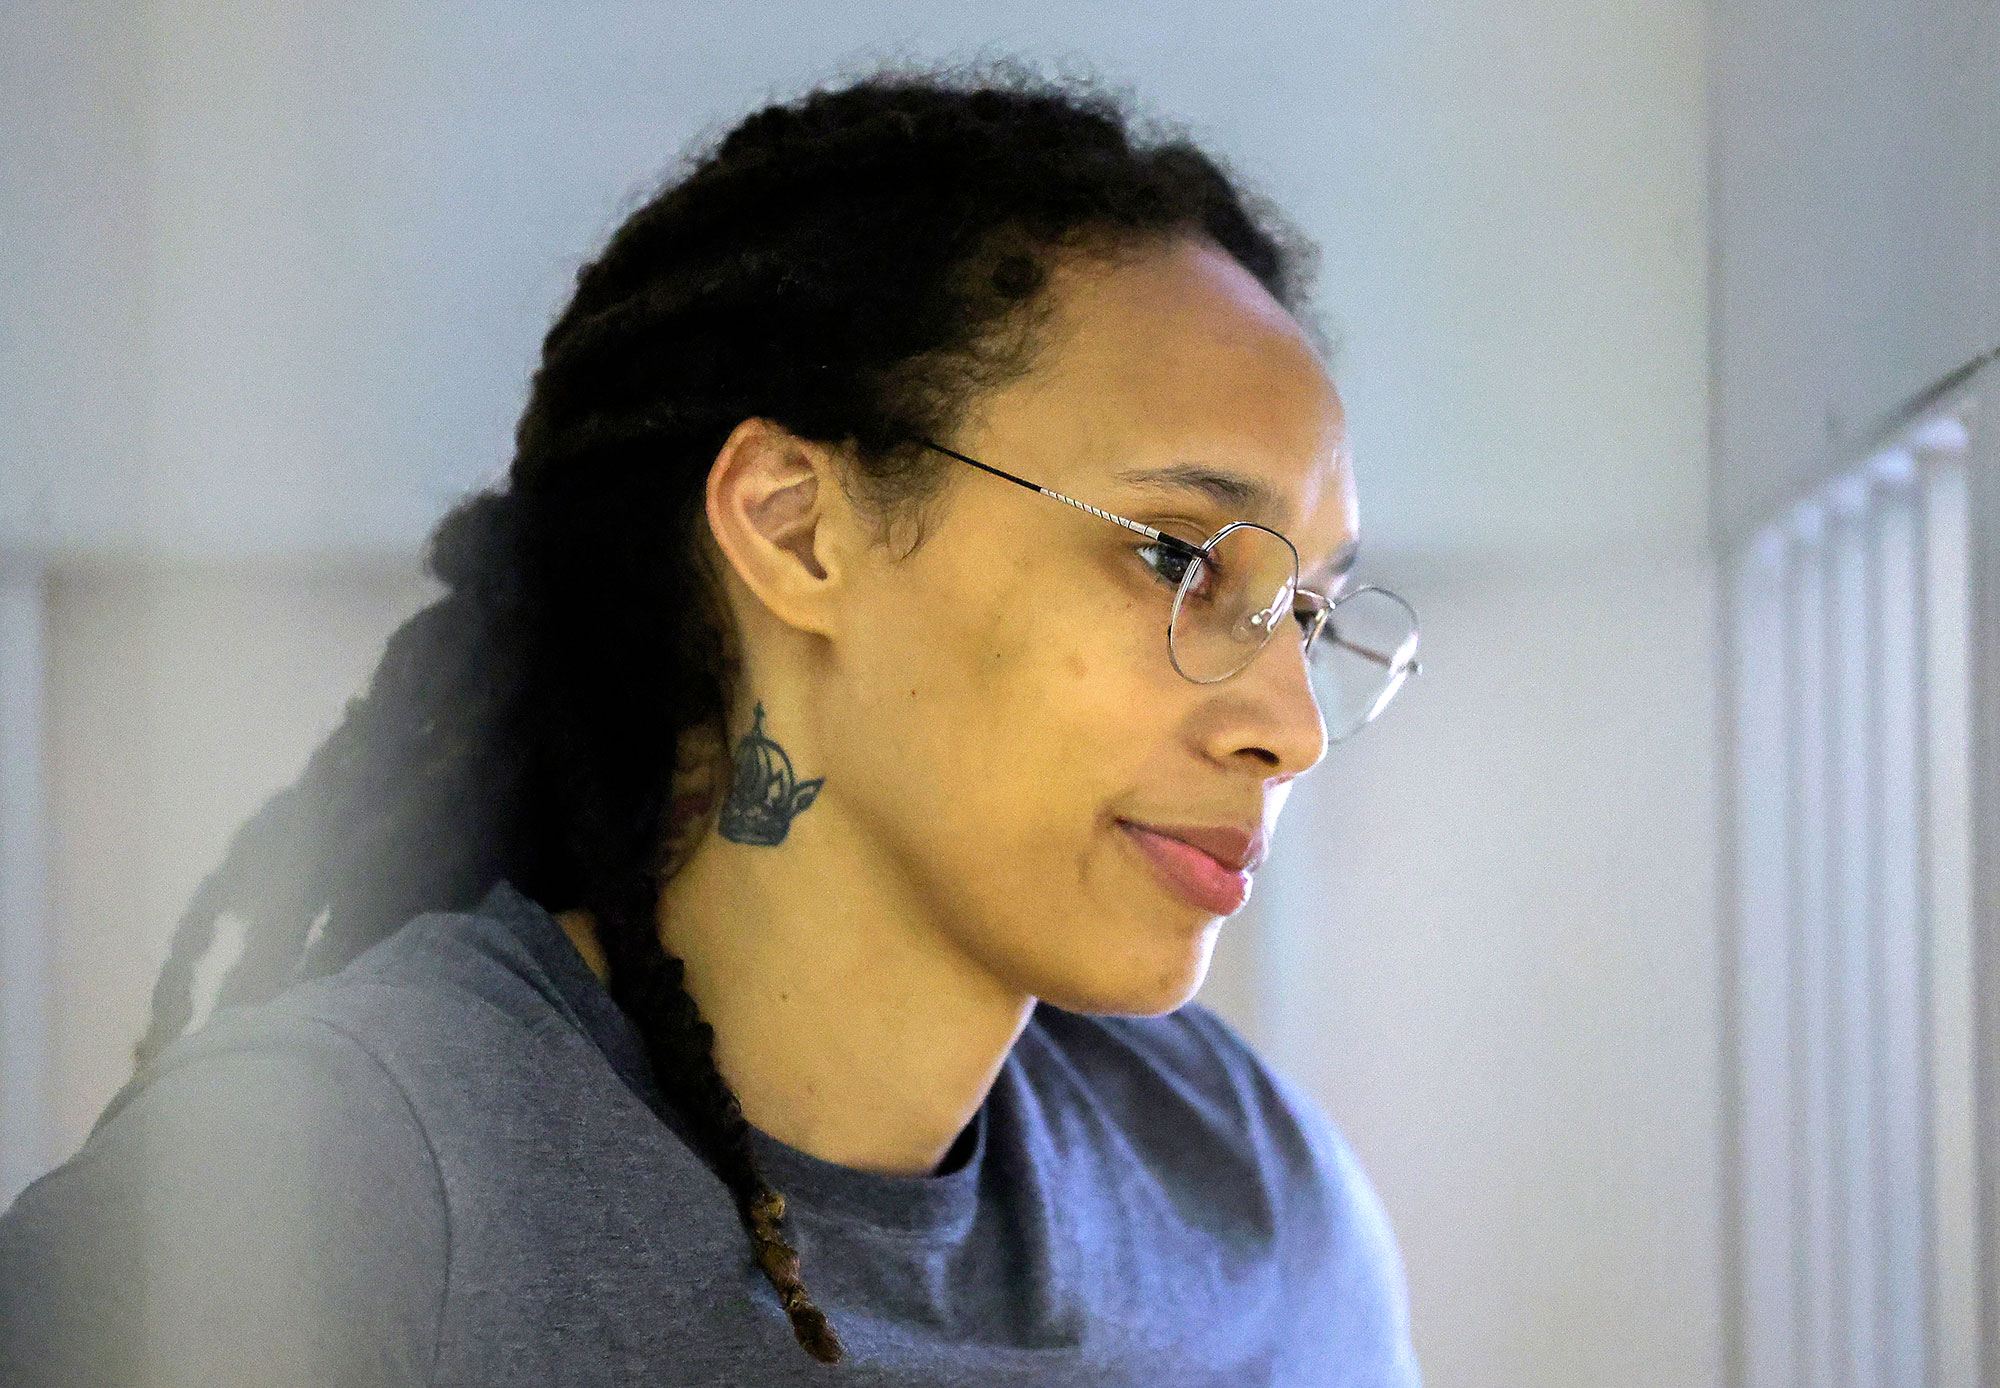 American Basketball Player Brittney Griner Reportedly Detained in Russia:  Photo 4716553, Brittney Griner Photos